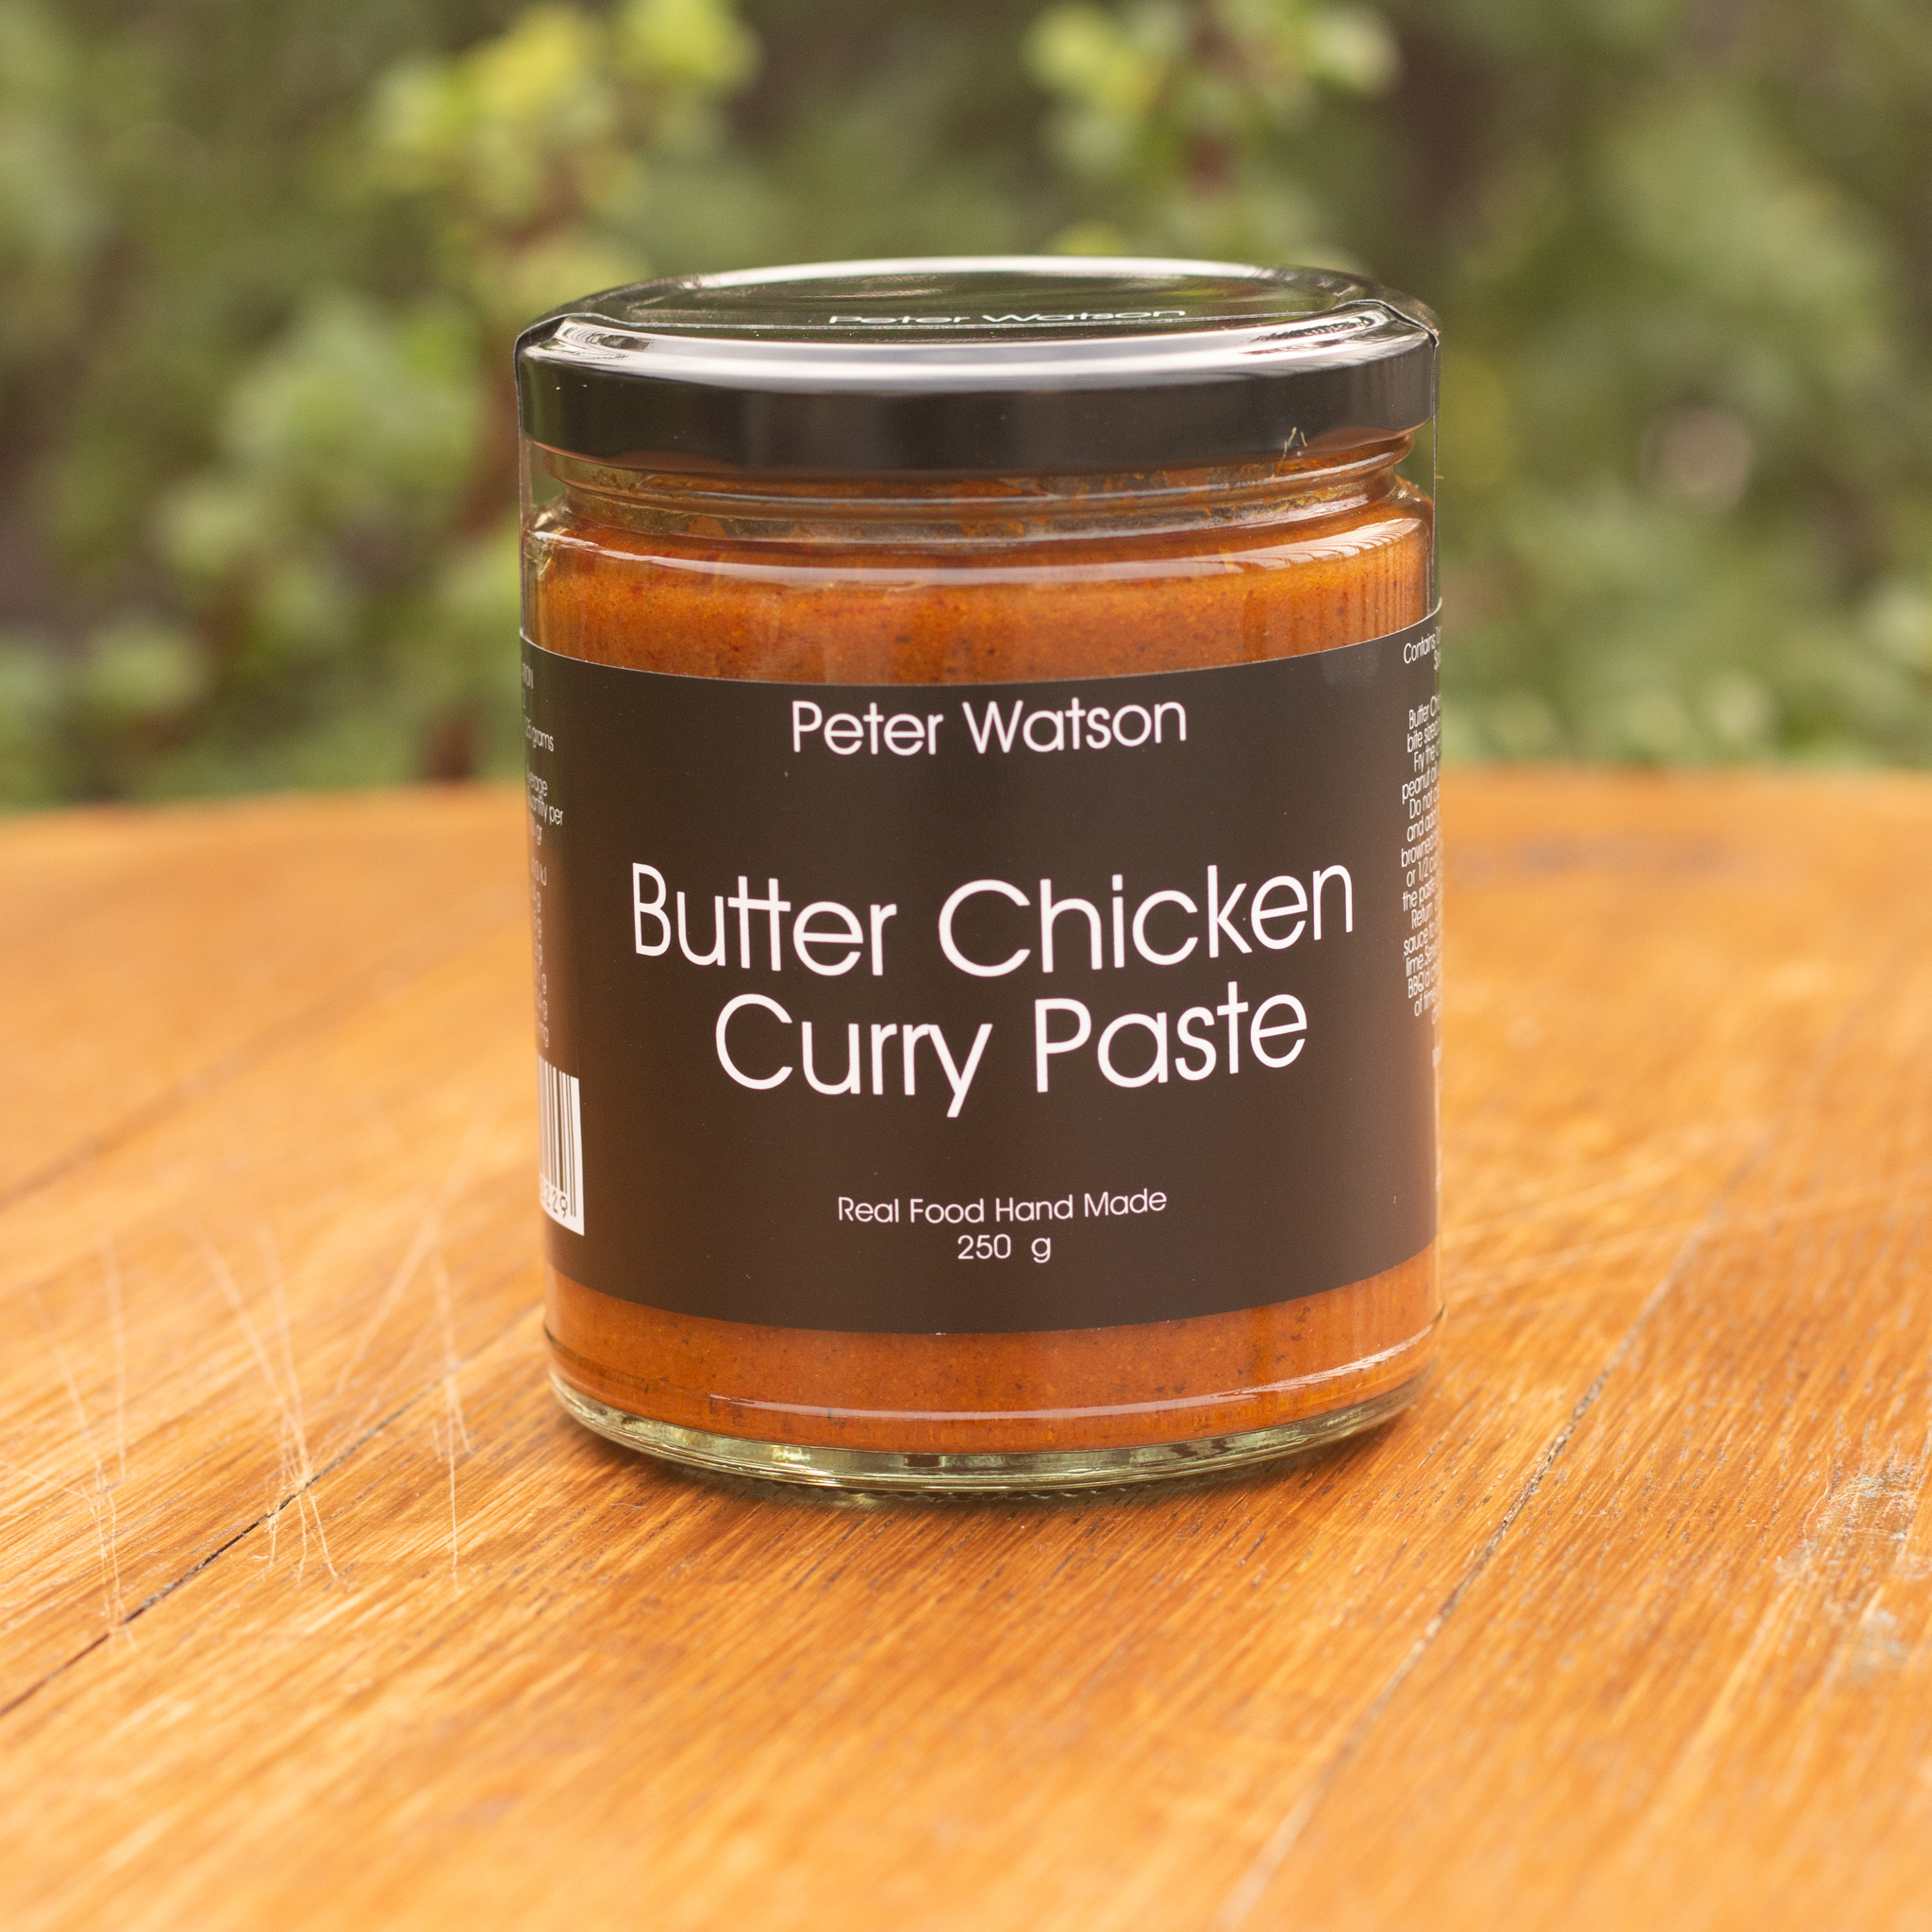 Peter Watson Butter Chicken Curry Paste 250g - The Grocer